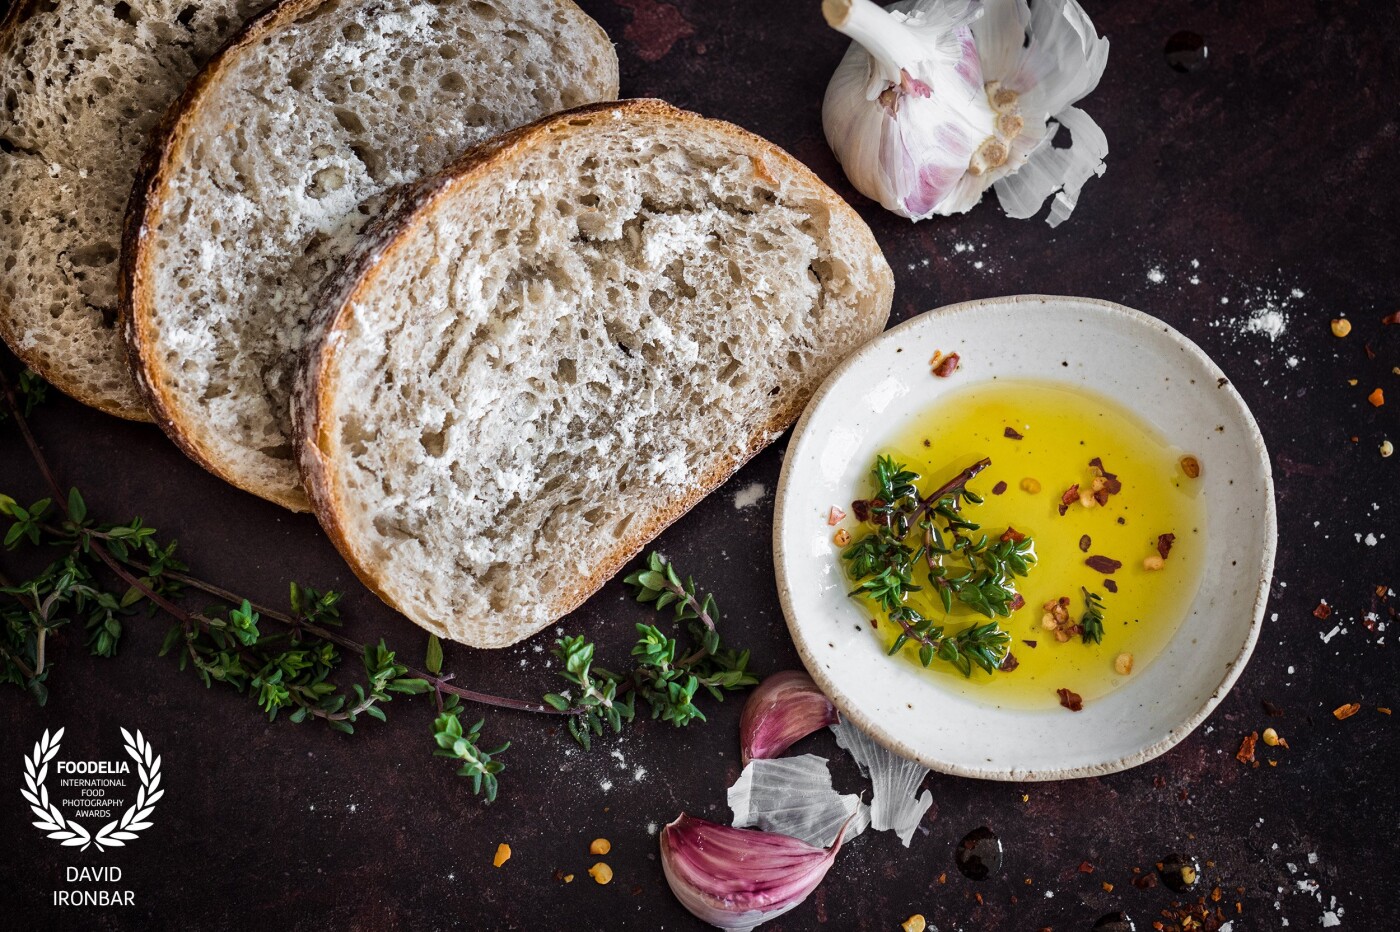 Freshly baked bread, complemented with garlic, spices, and olive oil to create a delicious appetizer. 